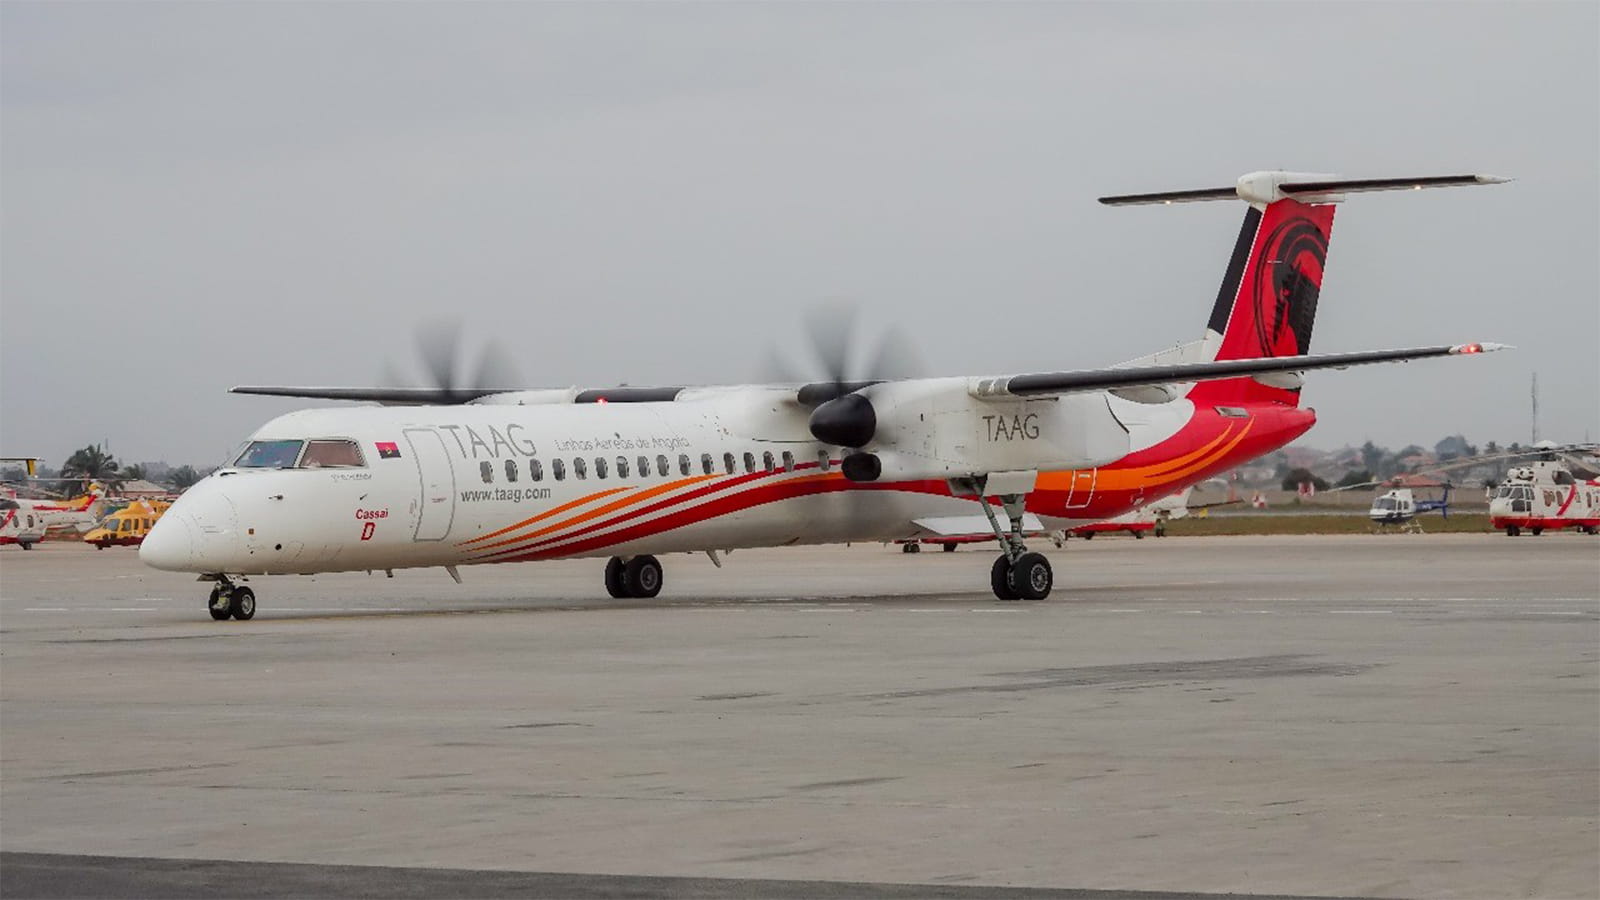 TAAG’s De Havilland Canada Dash 8-400 aircraft powered by the PW150A engine